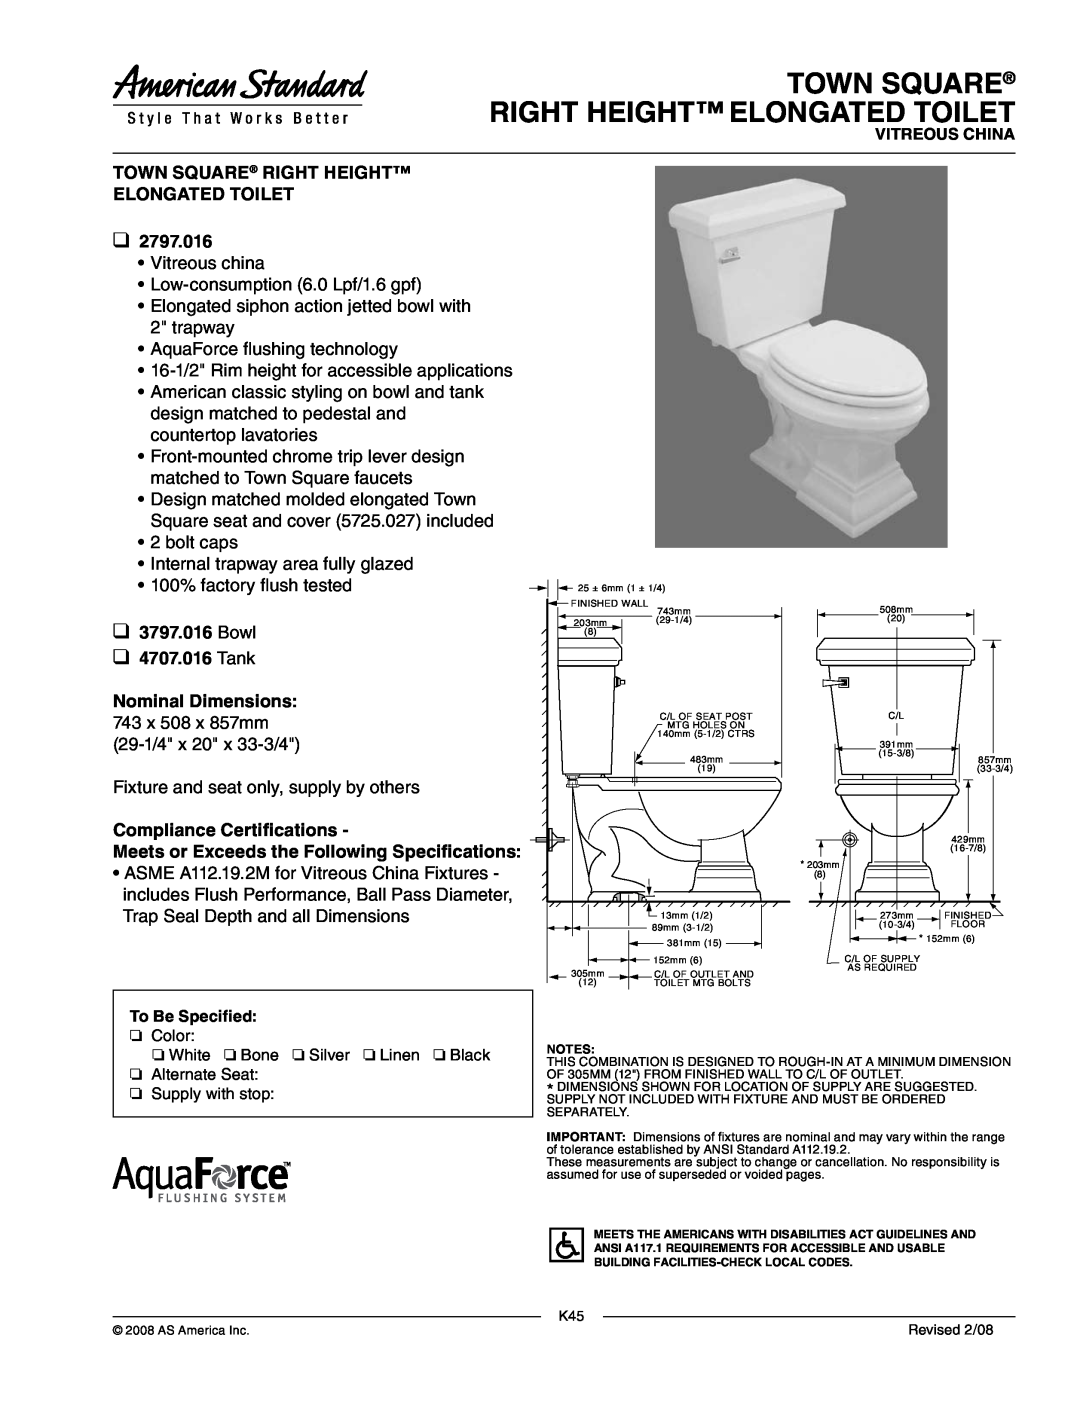 American Standard 3797.016 dimensions Town Square Right Height Elongated Toilet, 2797.016, Compliance Certifications 